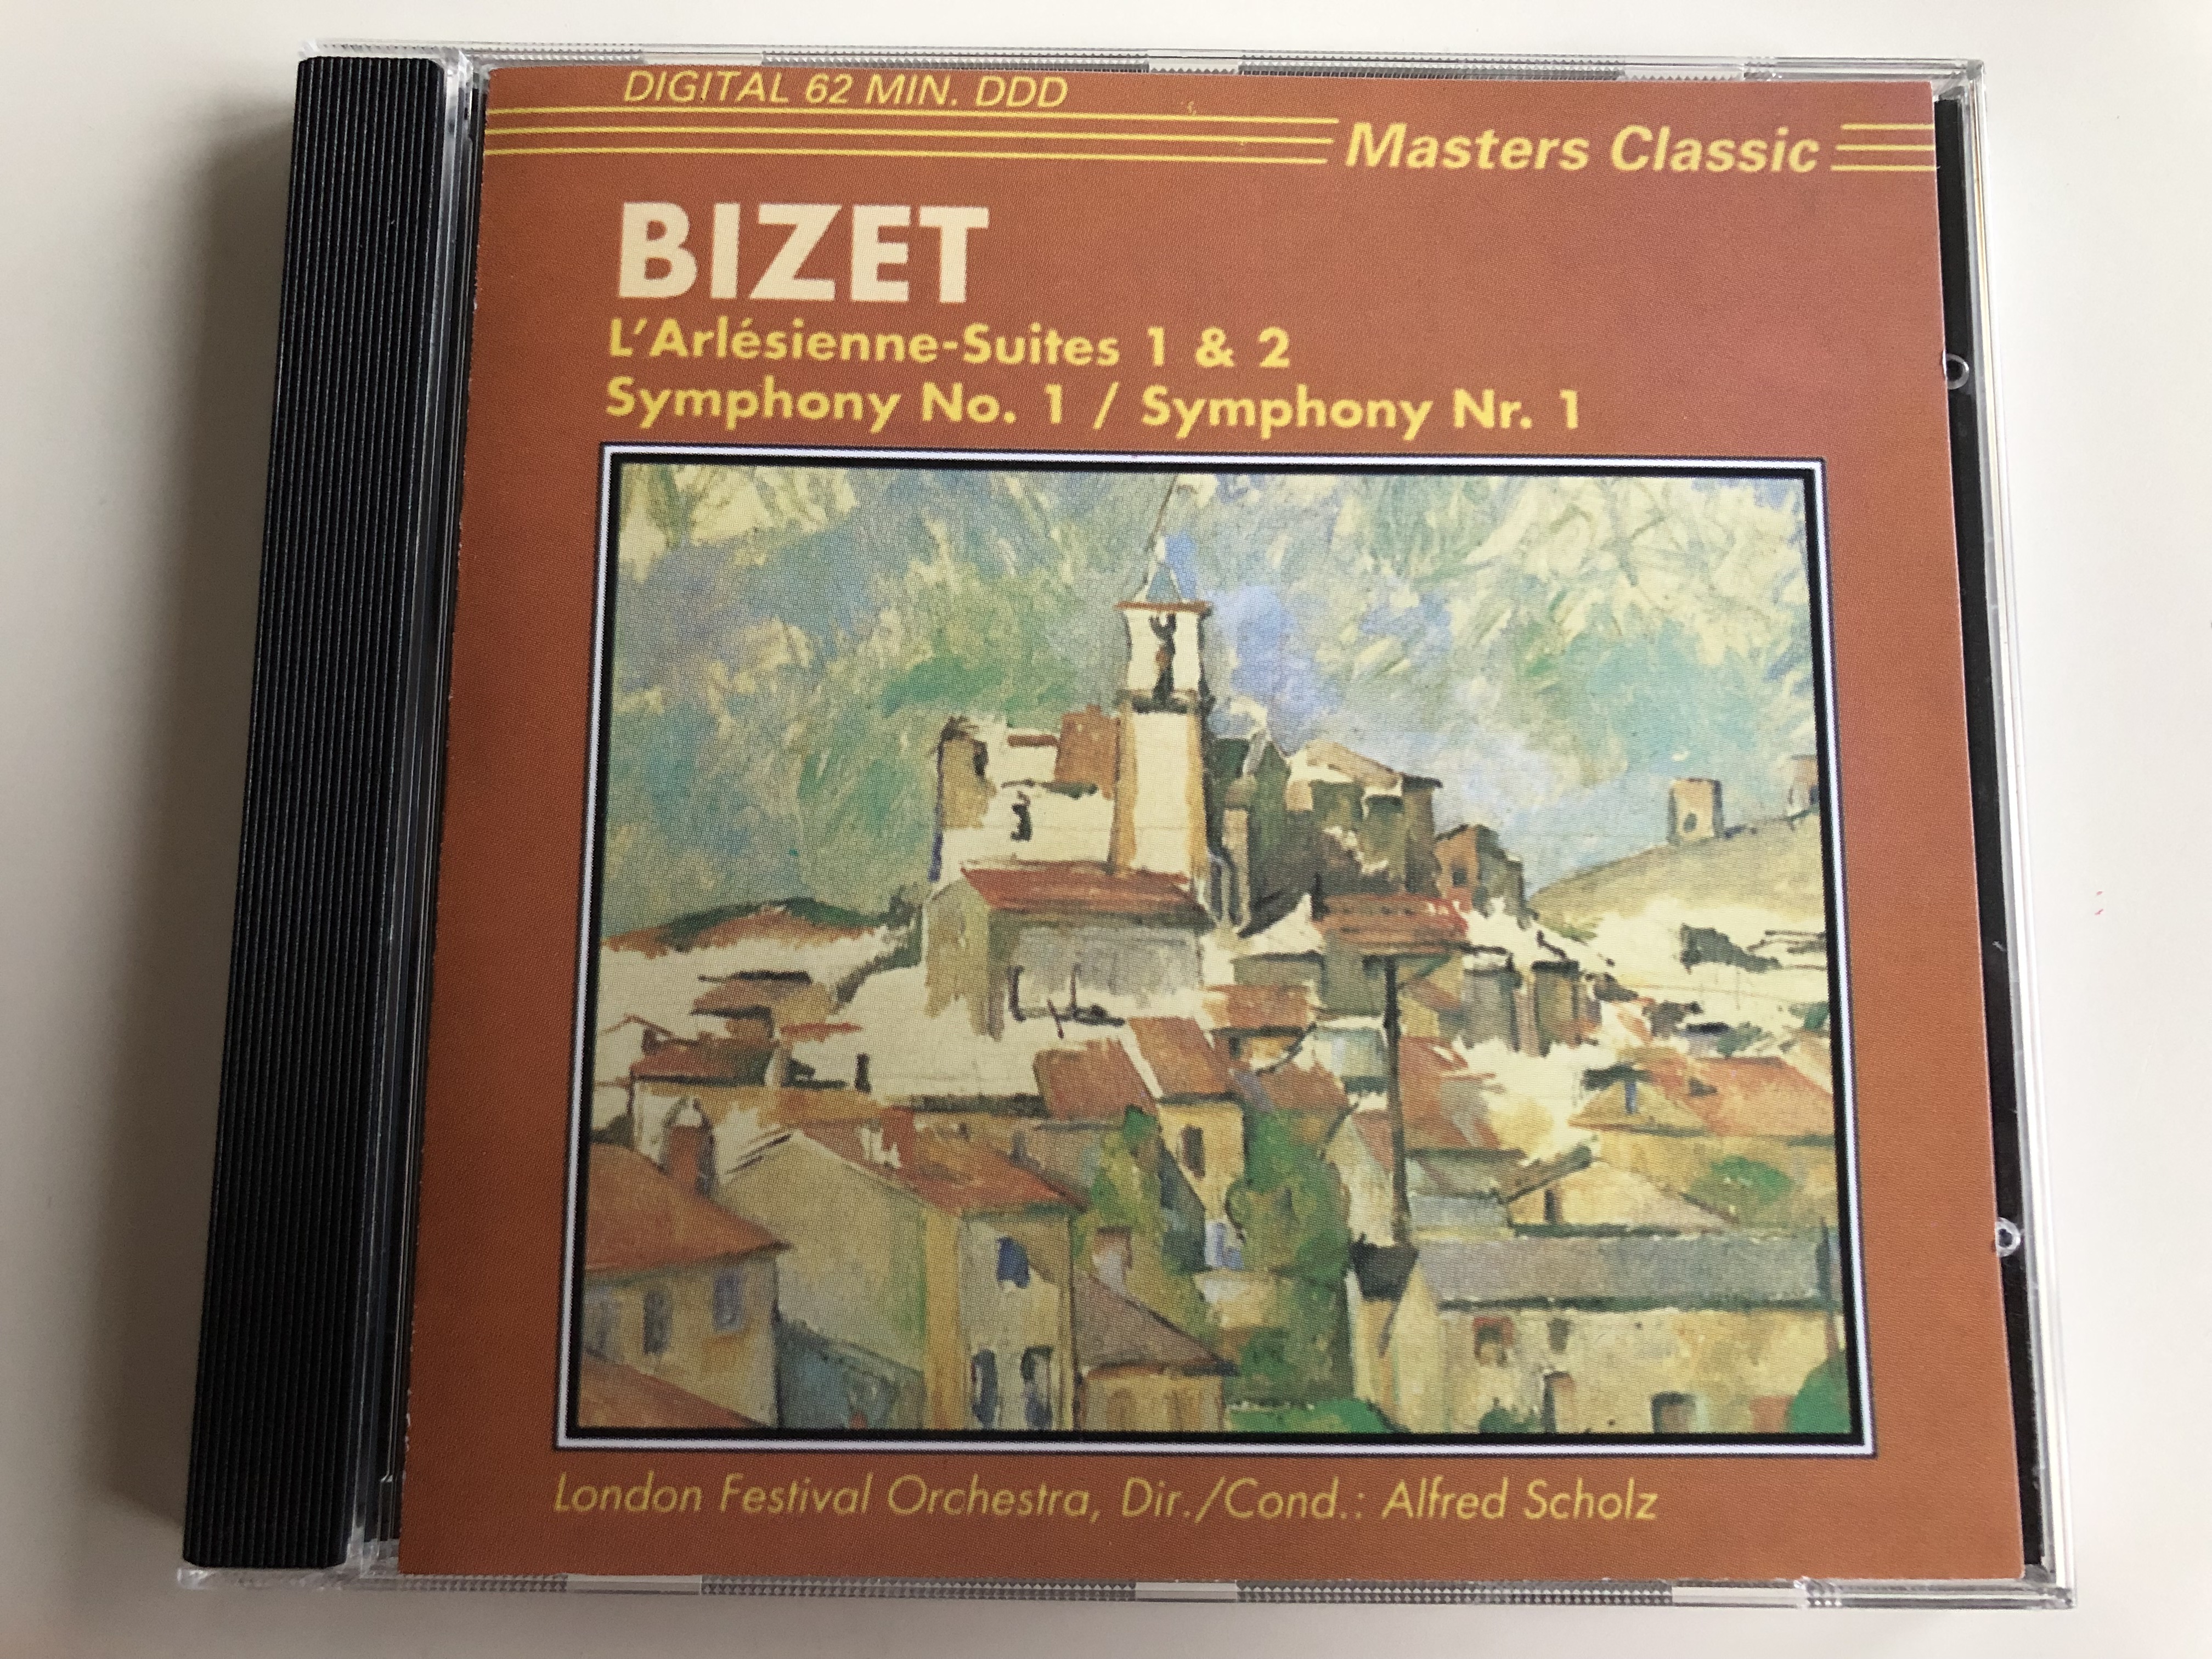 georges-bizet-audio-cd-l-arl-sienne-suites-1-2-symphony-no.-1-symphony-nr.-1-london-festival-orchestra-conducted-by-alfred-scholz-masters-classic-cls-4216-1-.jpg